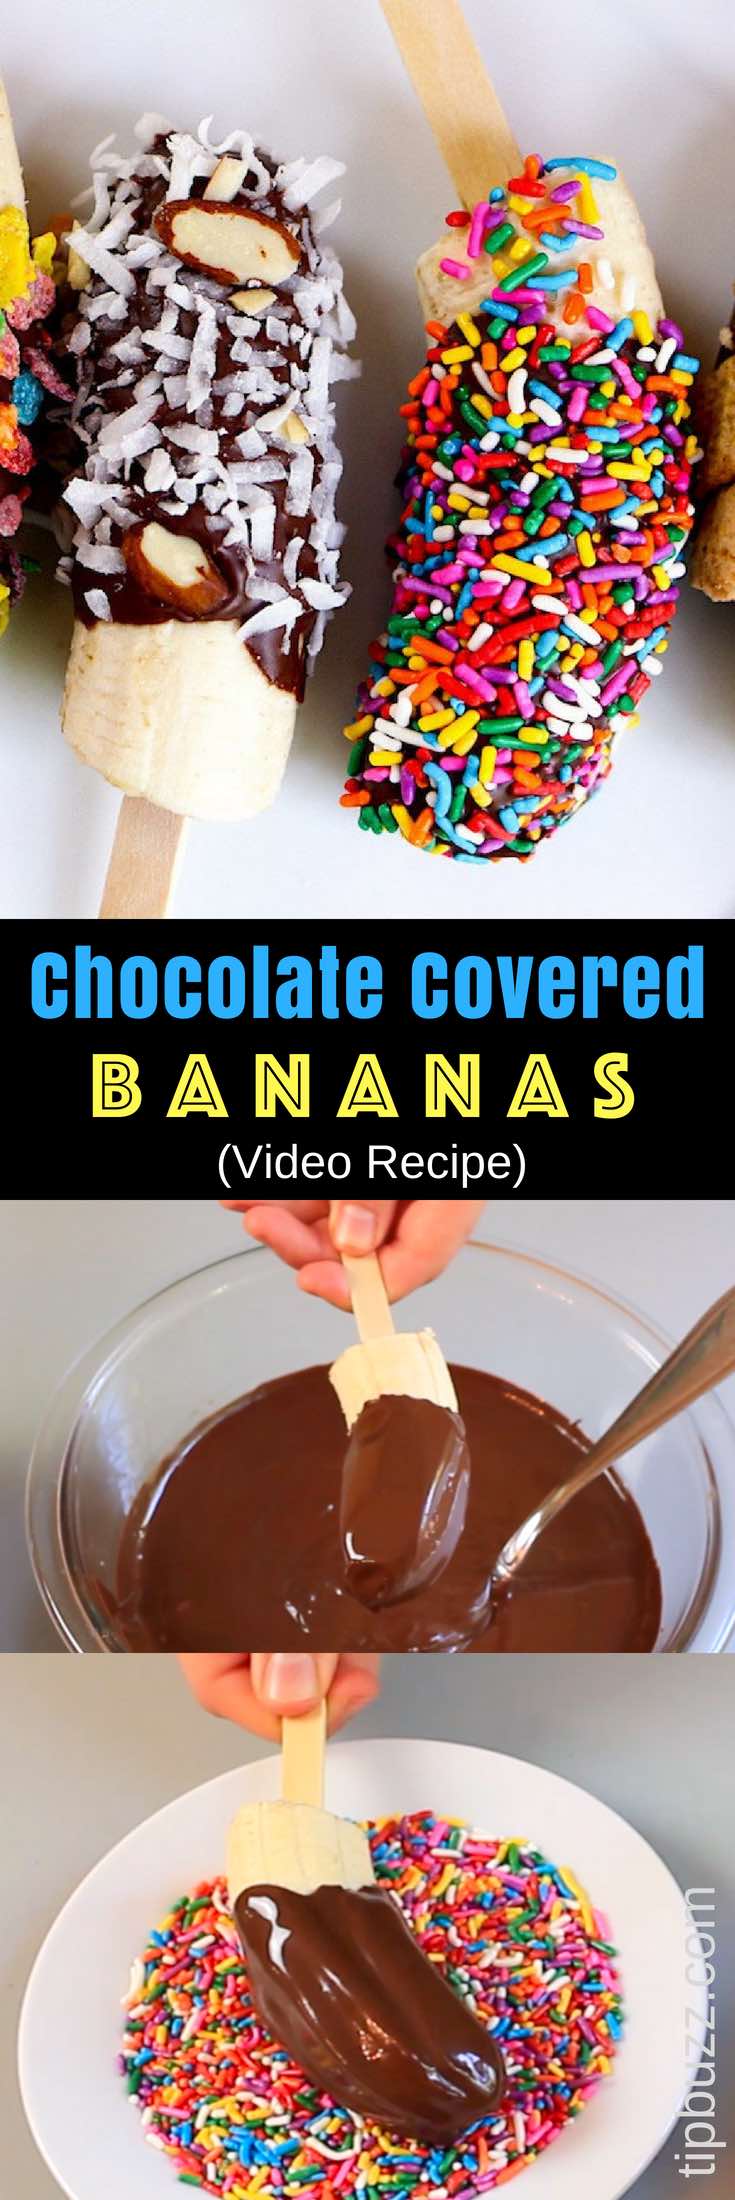 Chocolate Covered Frozen Bananas – The easiest snacks ever! Just 3 Ingredients: banana, chocolate and coconut oil; plus whatever toppings you like. We used M&M crushed colored, fruity pebble cereal, cinnamon toast crunch and colored sprinkles, etc. They taste so good and look absolutely amazing! Quick and easy recipe. Kids friendly. Video recipe. | Tipbuzz.com #ChocolateCoveredBananas #ChocolateBananas #ChocolateCoveredFrozenBananas